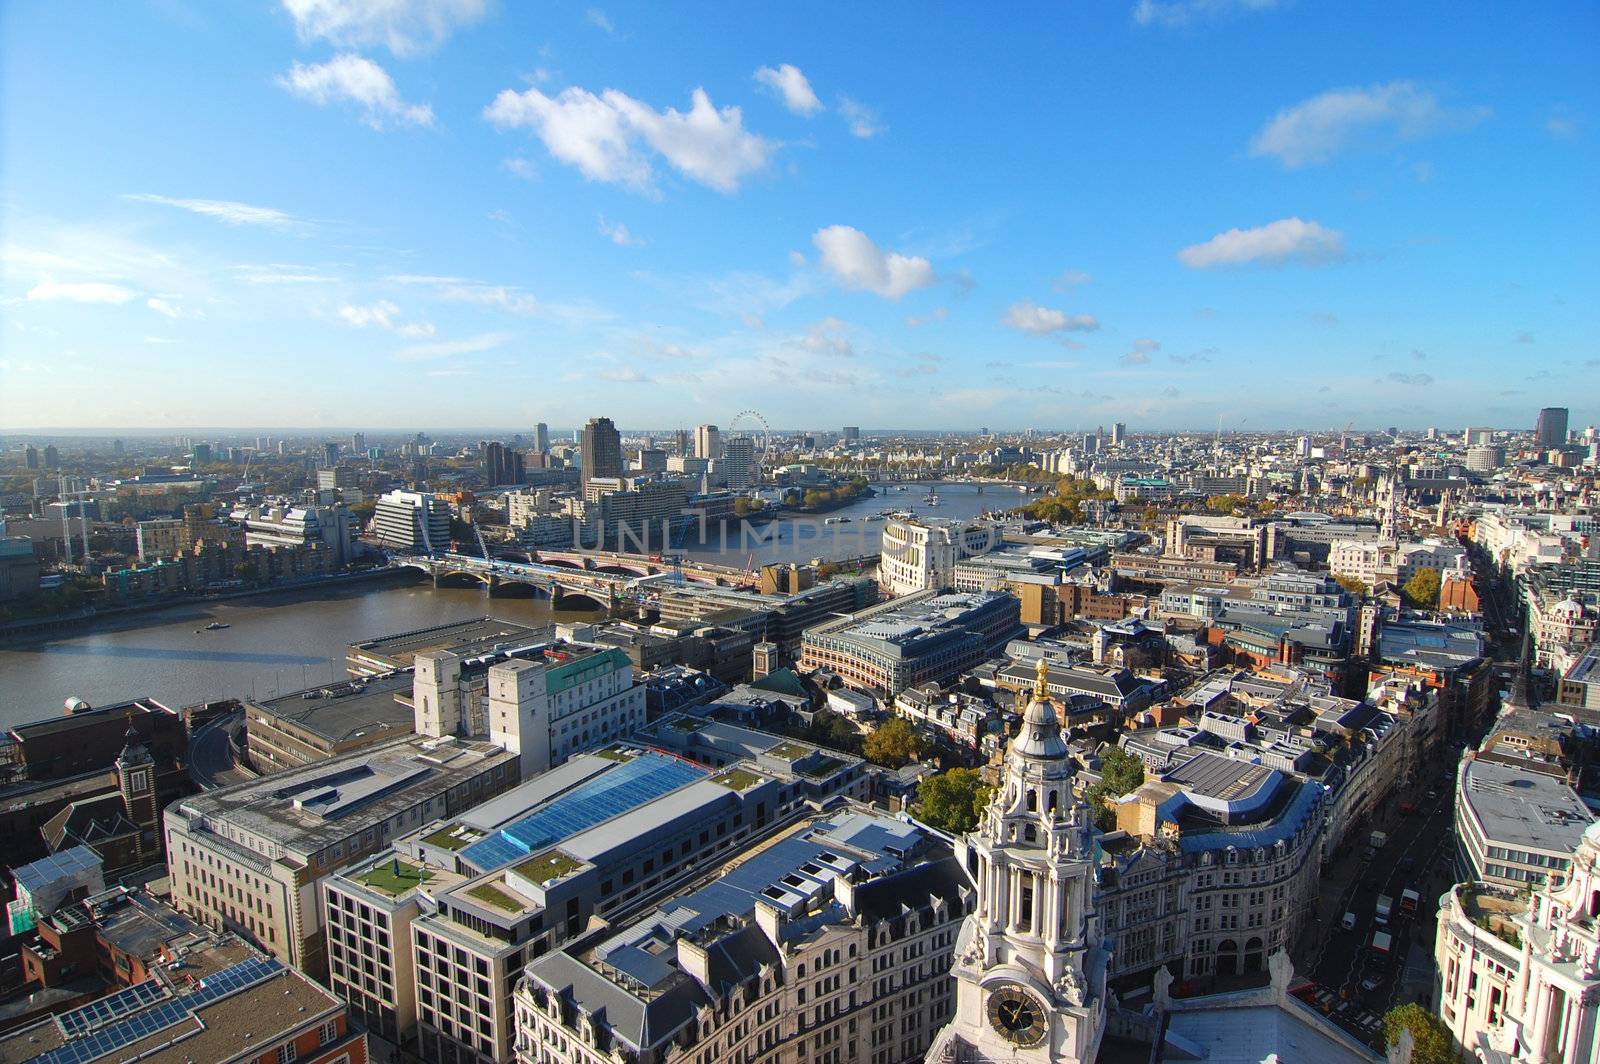 Wide angle view of the British capital and the River Thames